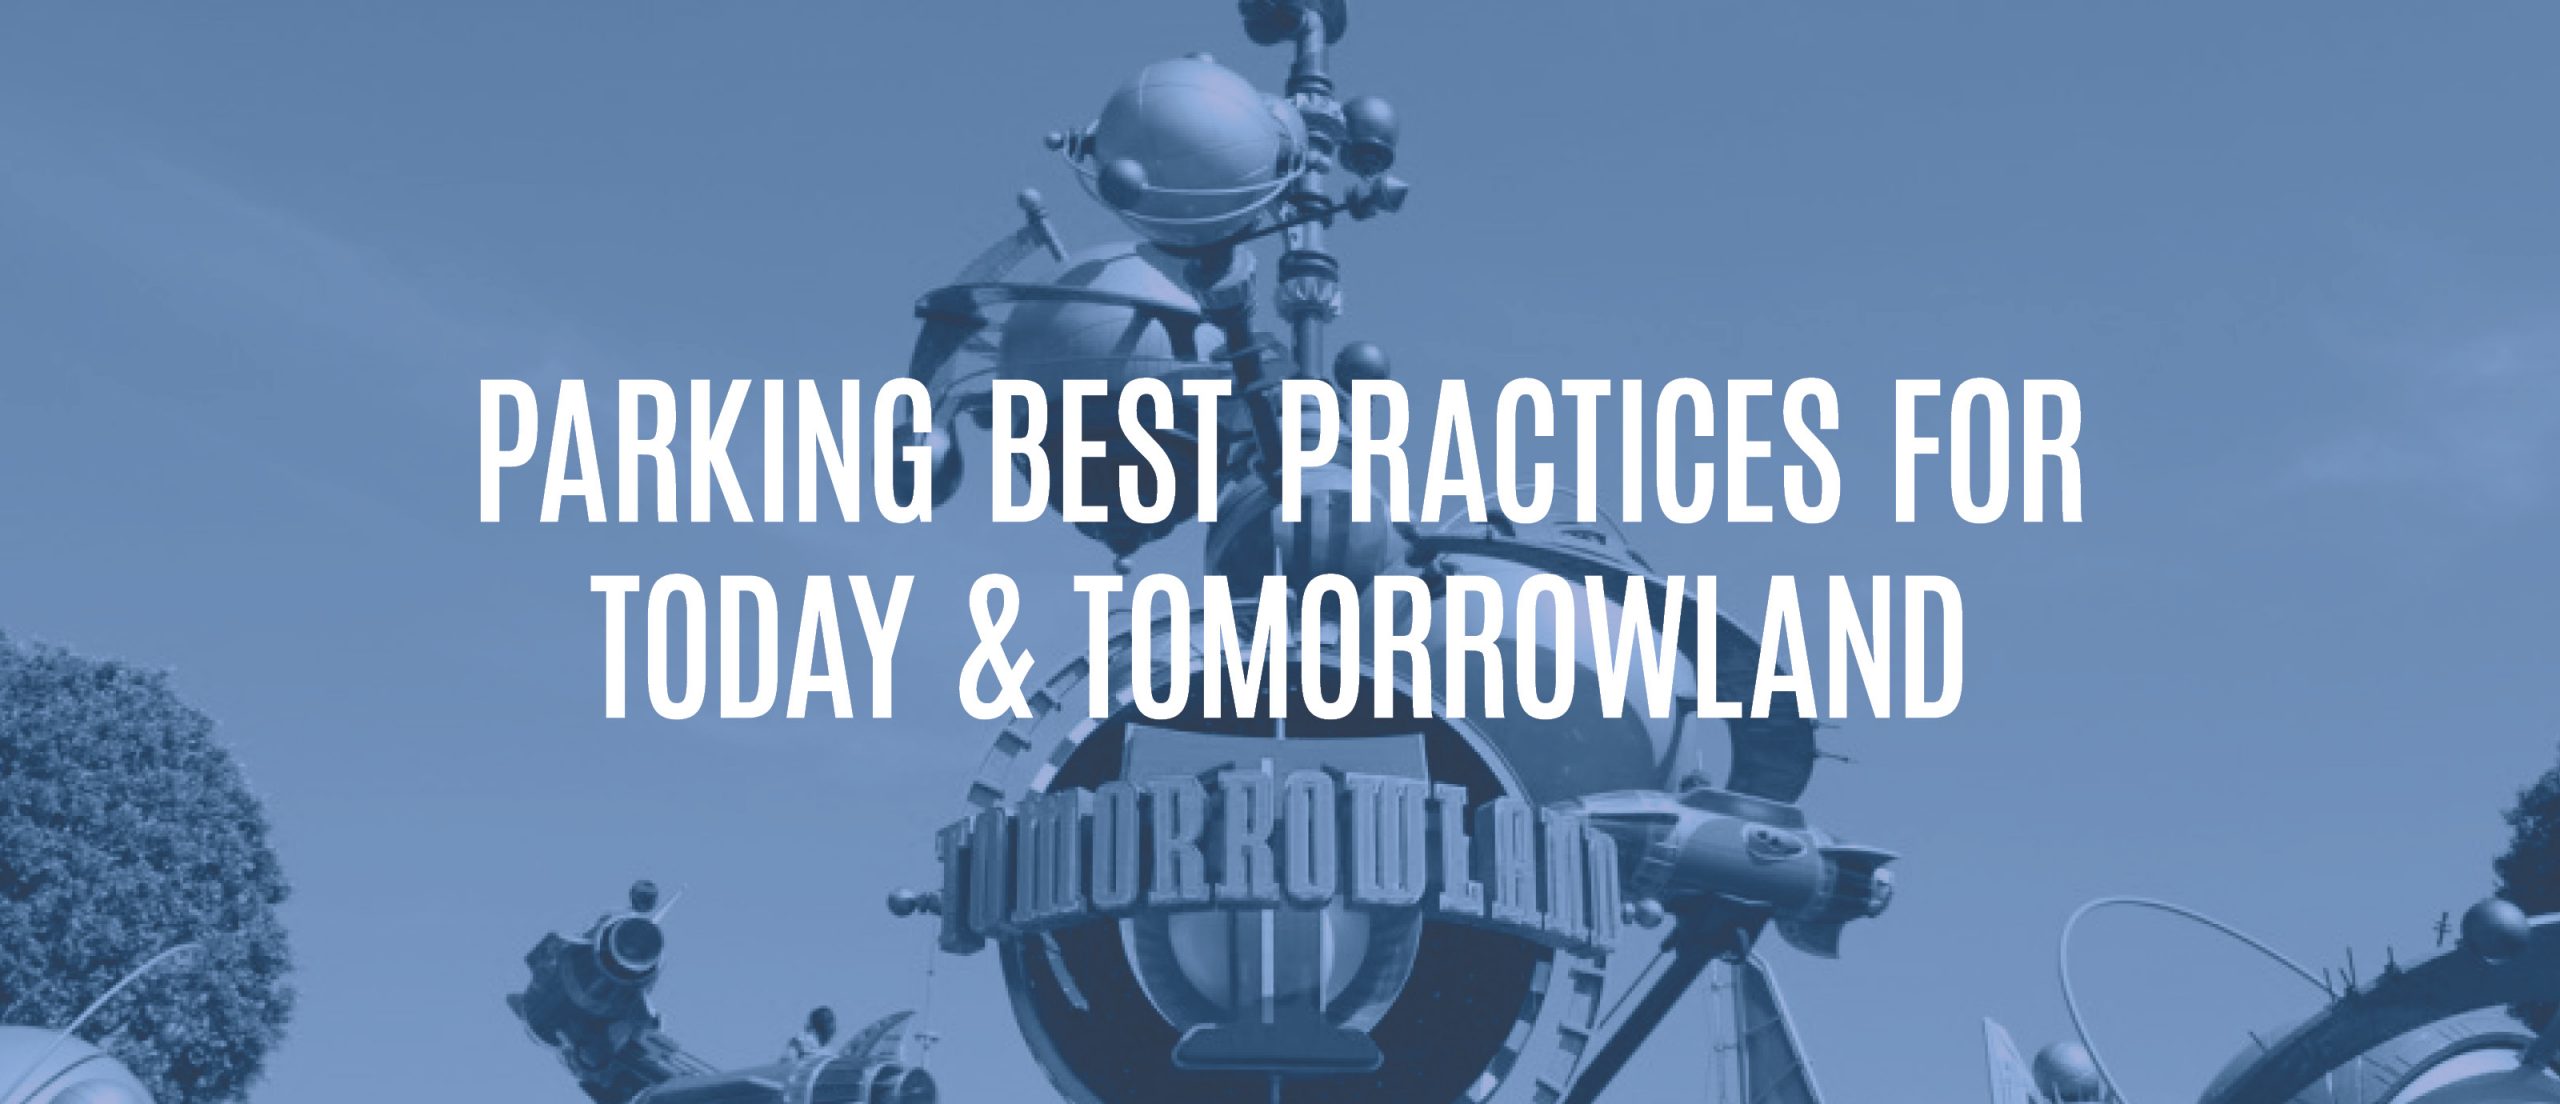 Blog Title - Parking best practices for today & tomorrowland